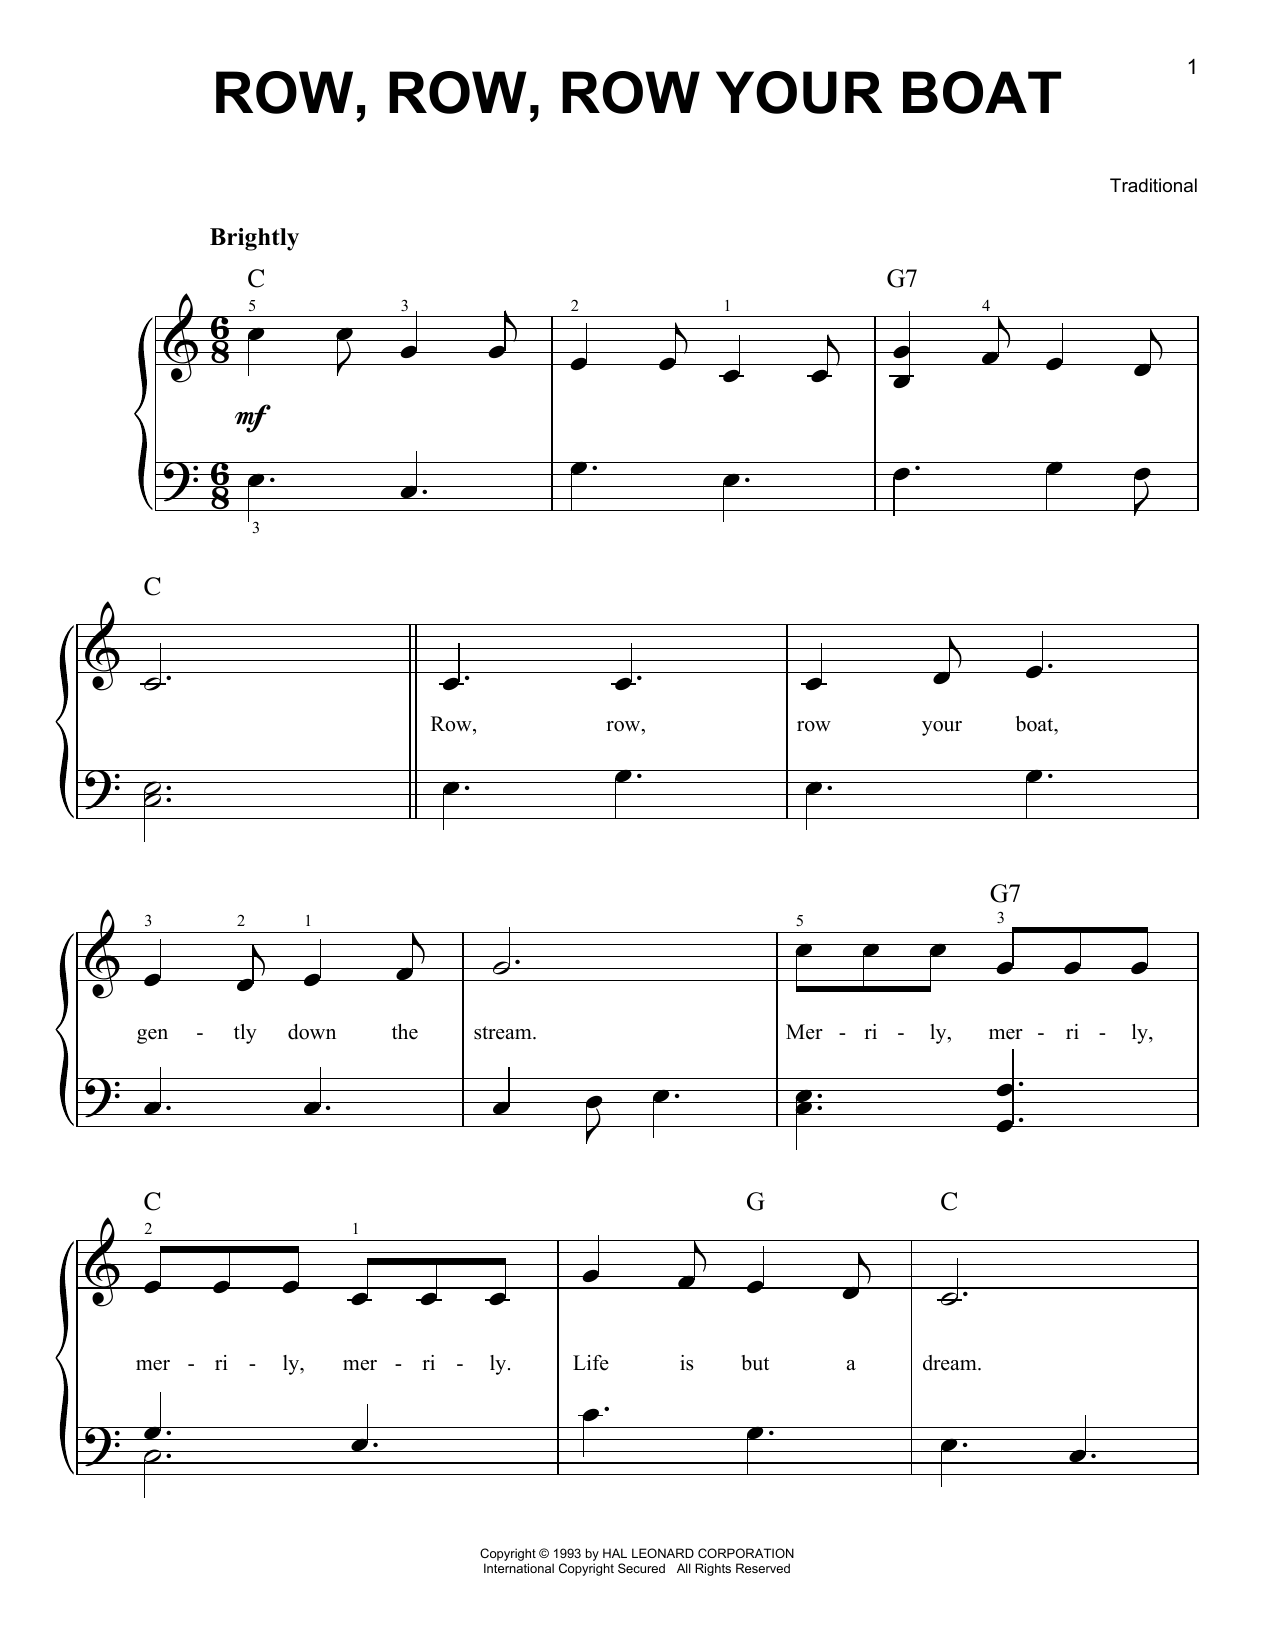 Download Traditional Row, Row, Row Your Boat Sheet Music